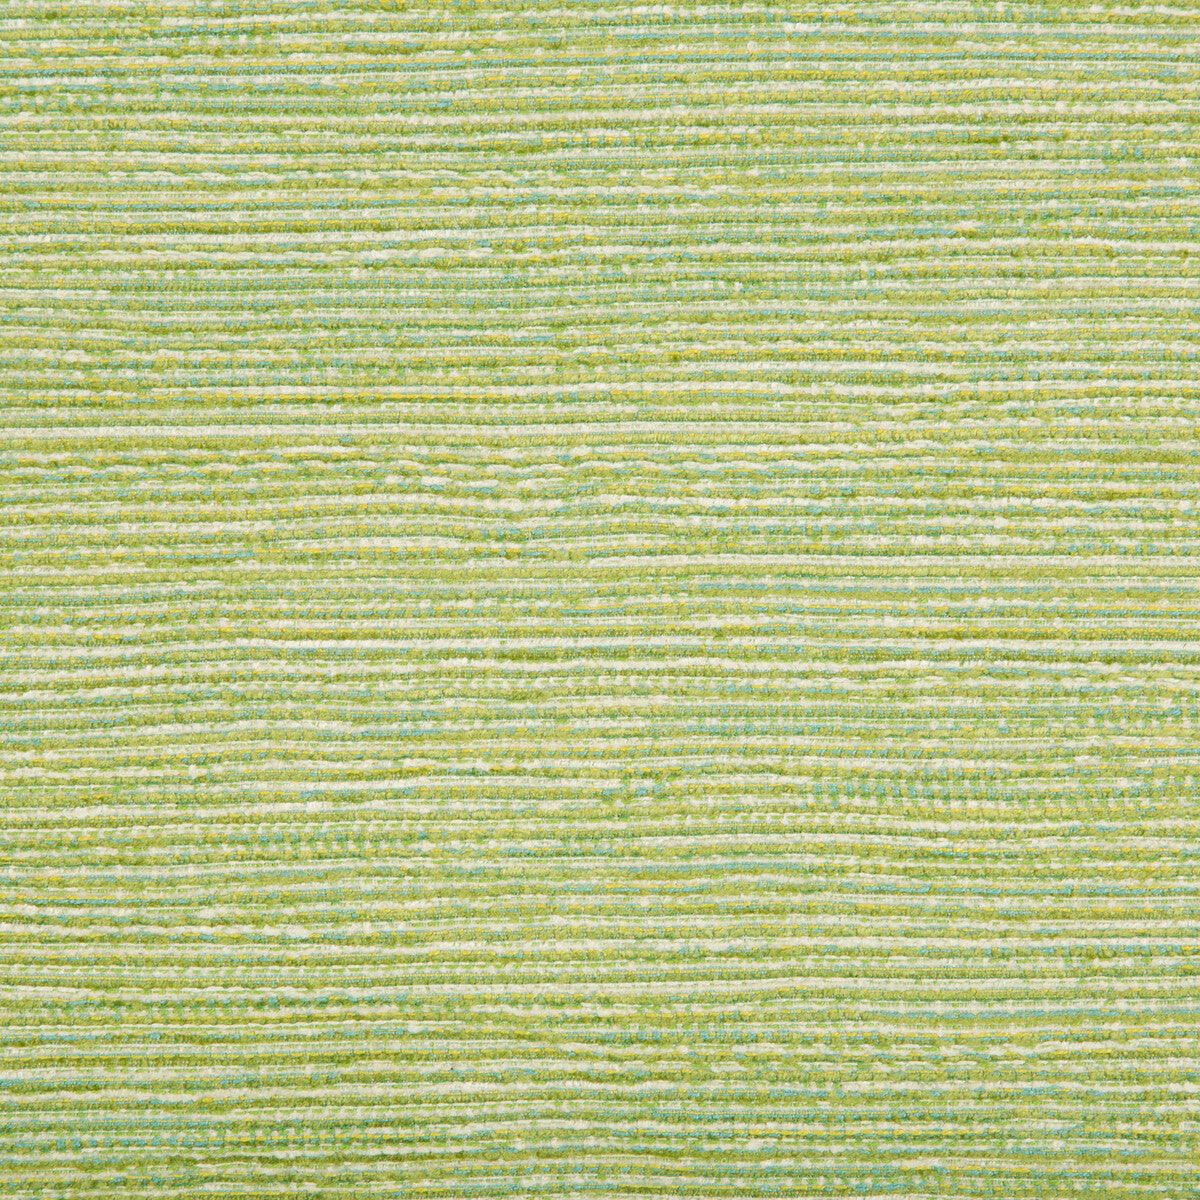 Kravet Design fabric in 34696-23 color - pattern 34696.23.0 - by Kravet Design in the Crypton Home collection